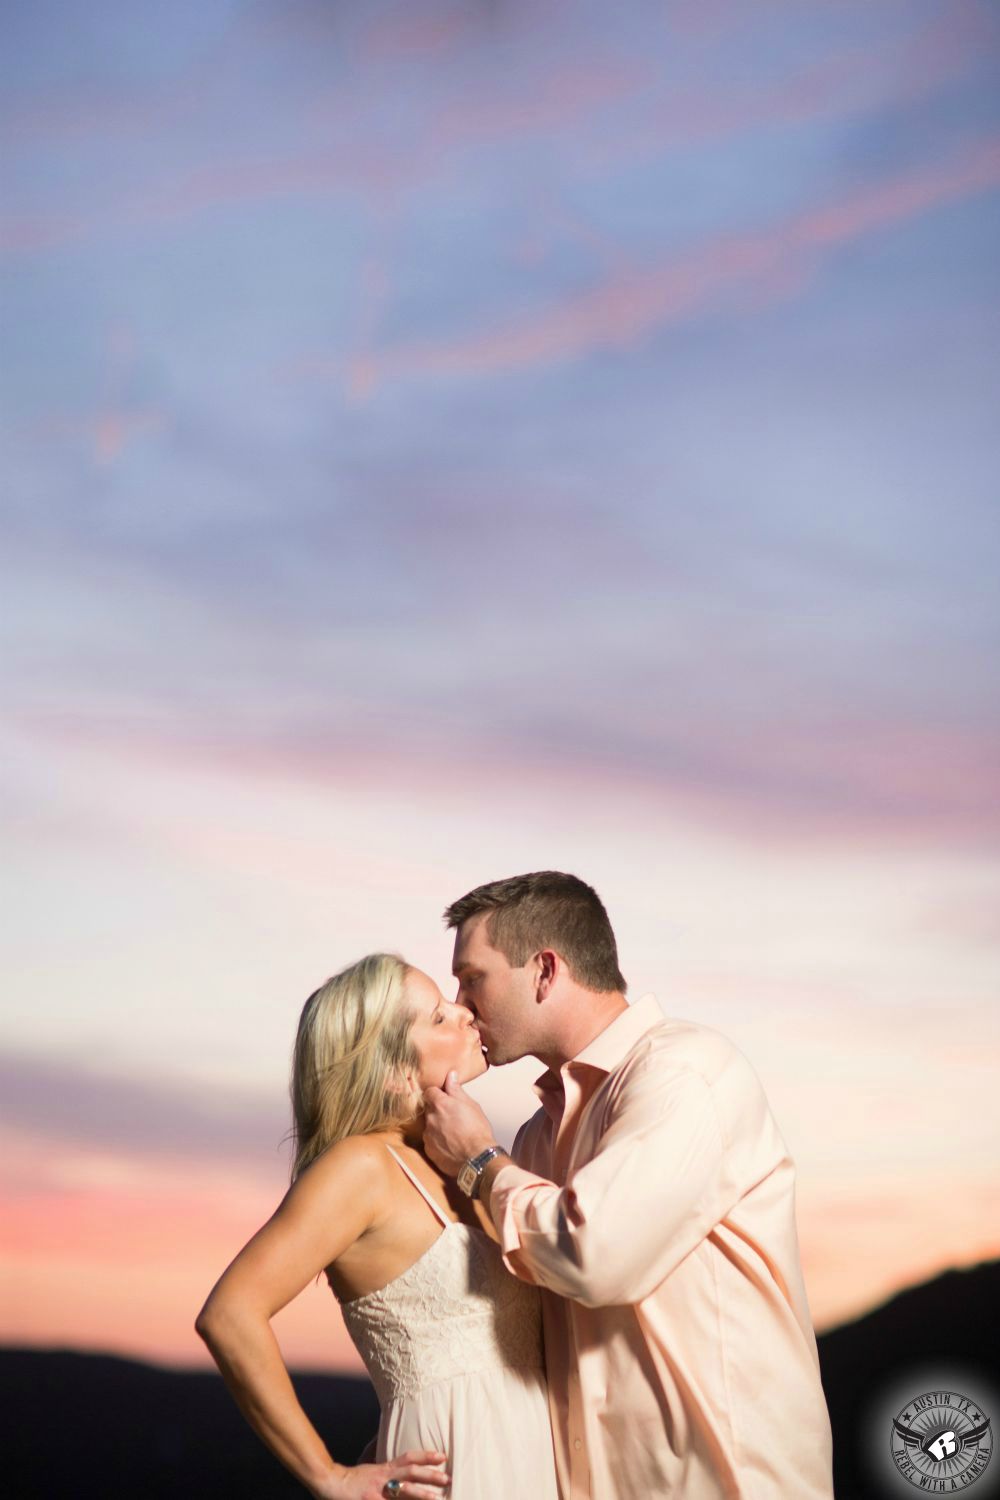 blond girl in a string tank top tenderly kisses a brunette guy in a pink button up shirt in front of a twilight sky willed with blue, purple and pink colors in this engagement photo from the pennybacker bridge in austin 